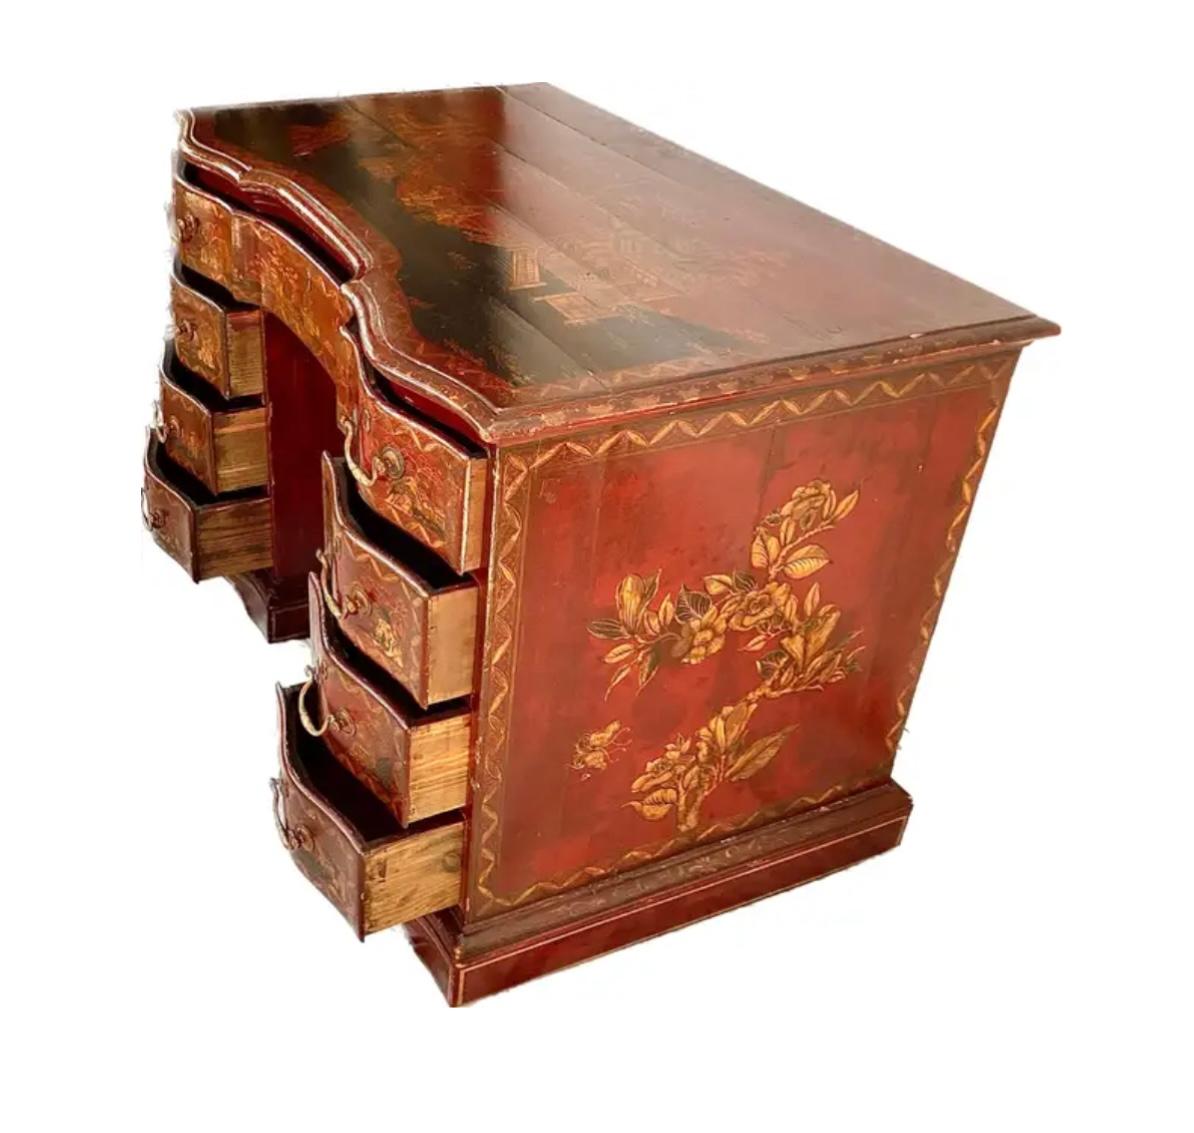 19th century George III chinoiserie knee-hole desk. The gilt chinoiserie is on a red lacquered background. Decorated bracket feet support the three central drawers flanked by a set of three matching drawers under a large upper drawer. The top and